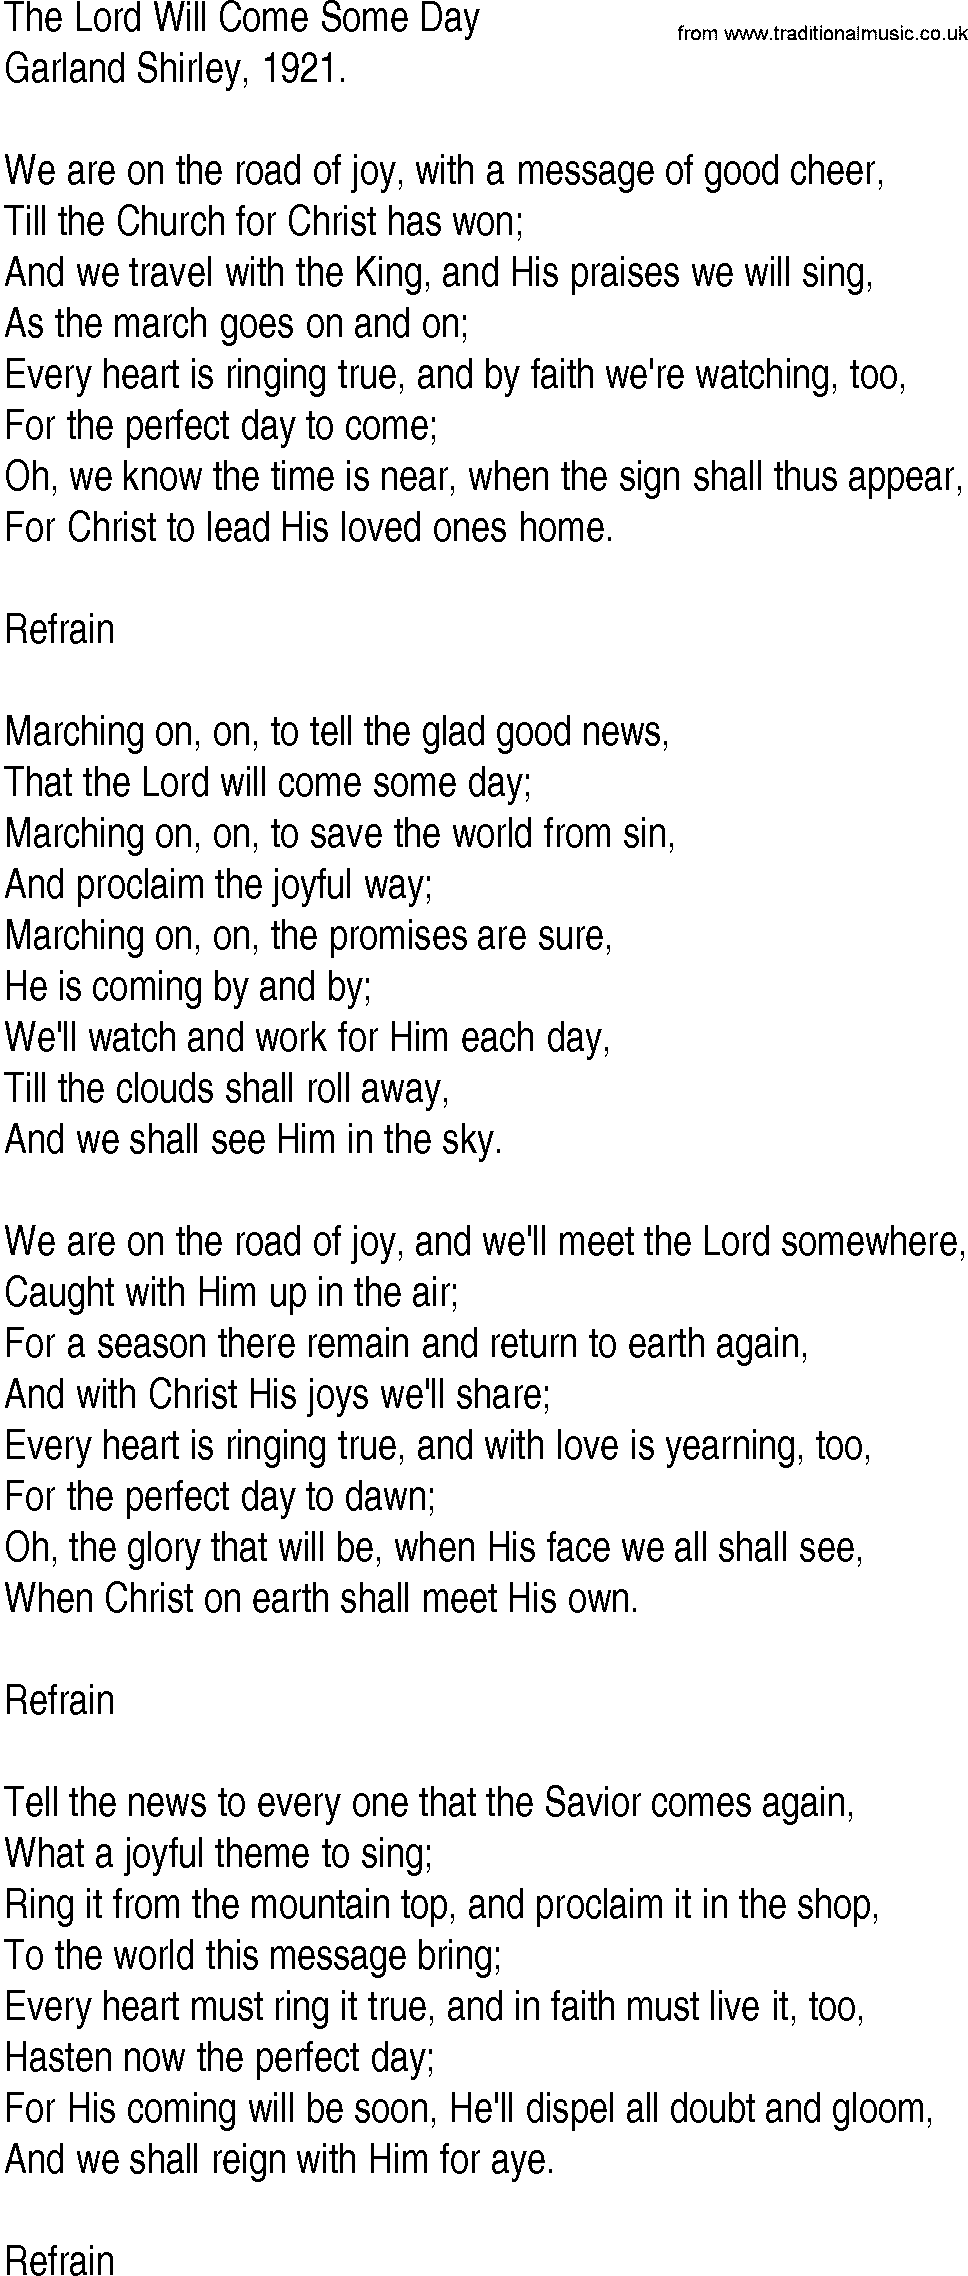 Hymn and Gospel Song: The Lord Will Come Some Day by Garland Shirley lyrics